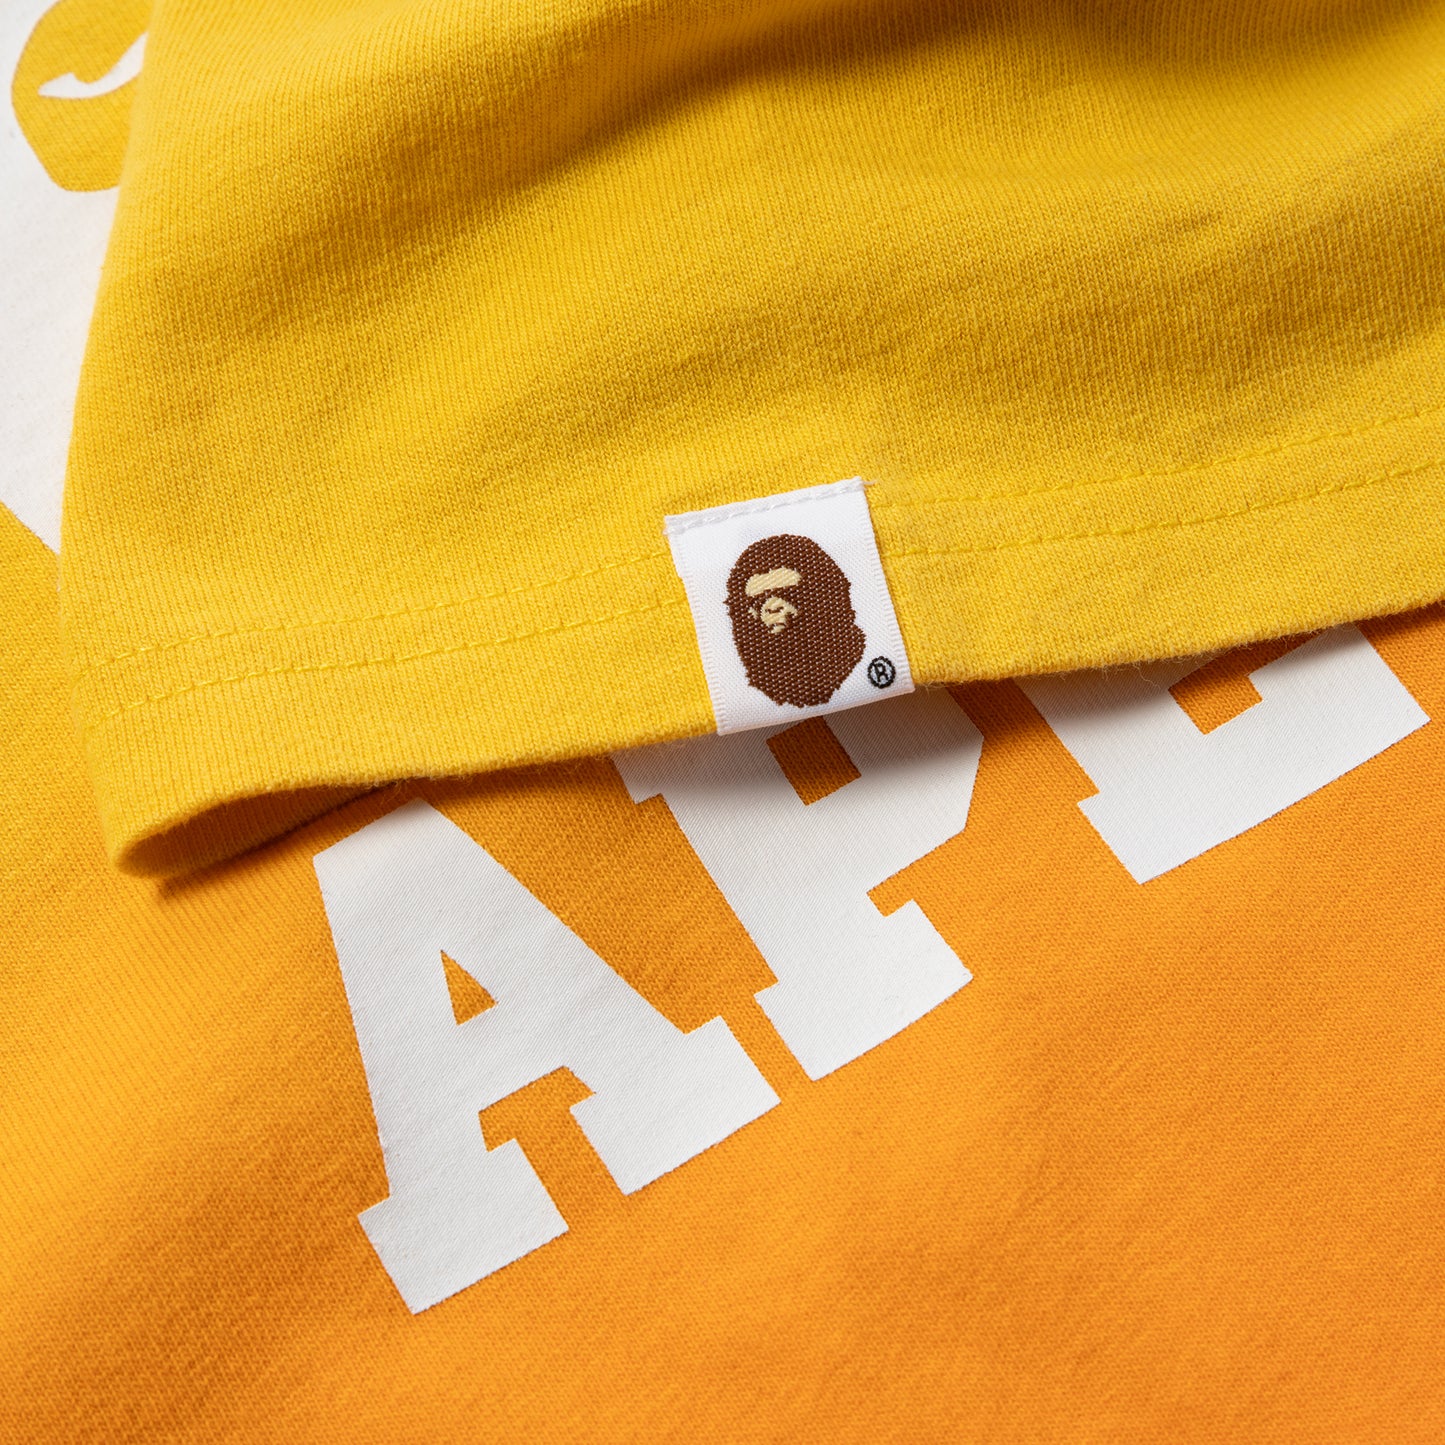 A Bathing Ape College Gradation Relaxed Fit Tee (Orange)